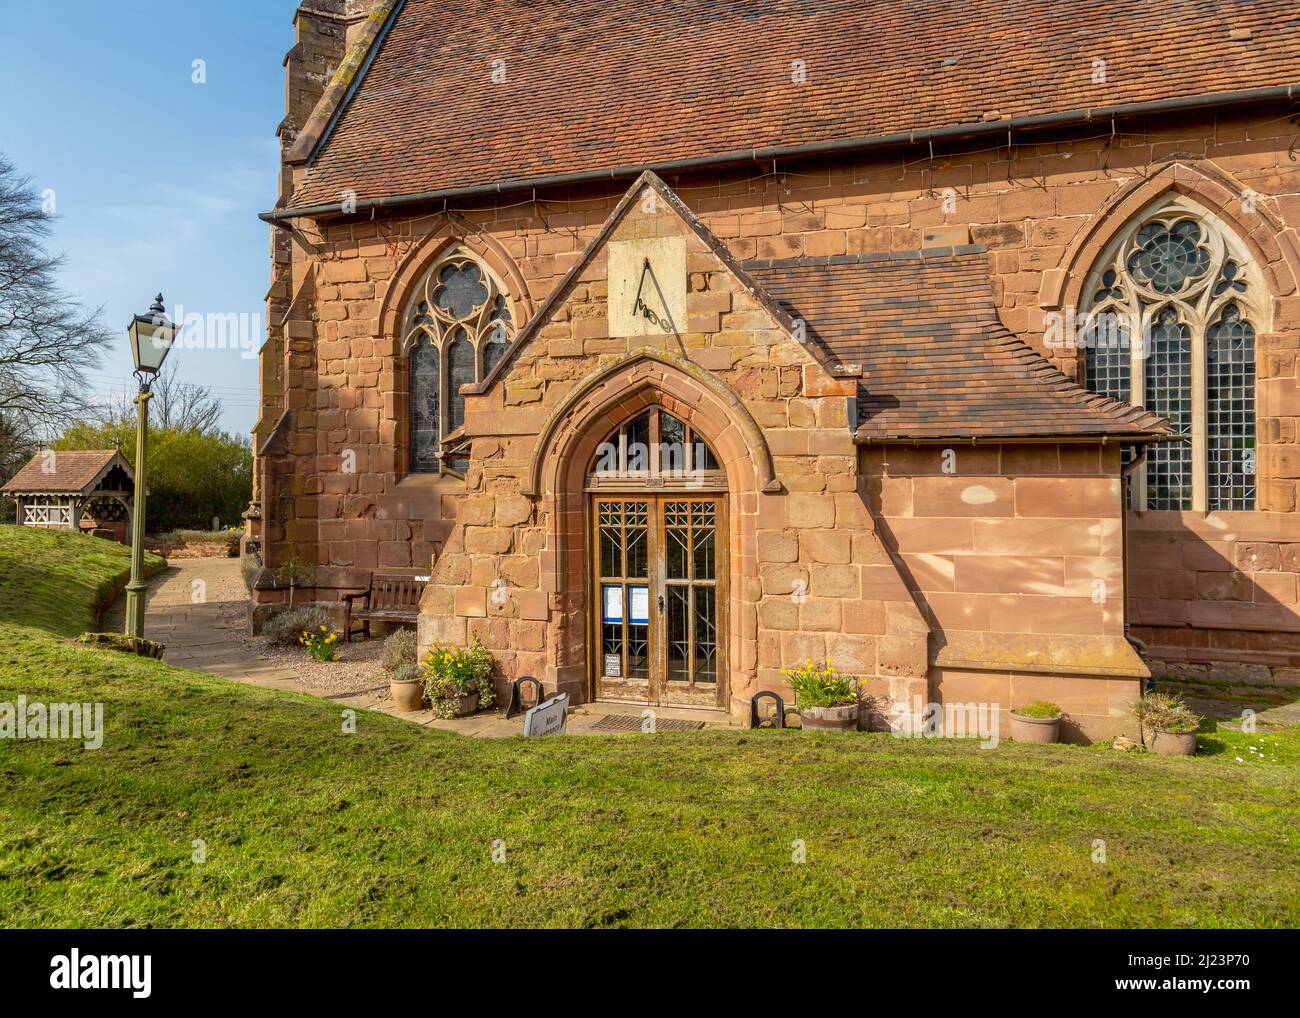 St. Peter's Church in Kinver, Staffordshire, England. Stock Photo